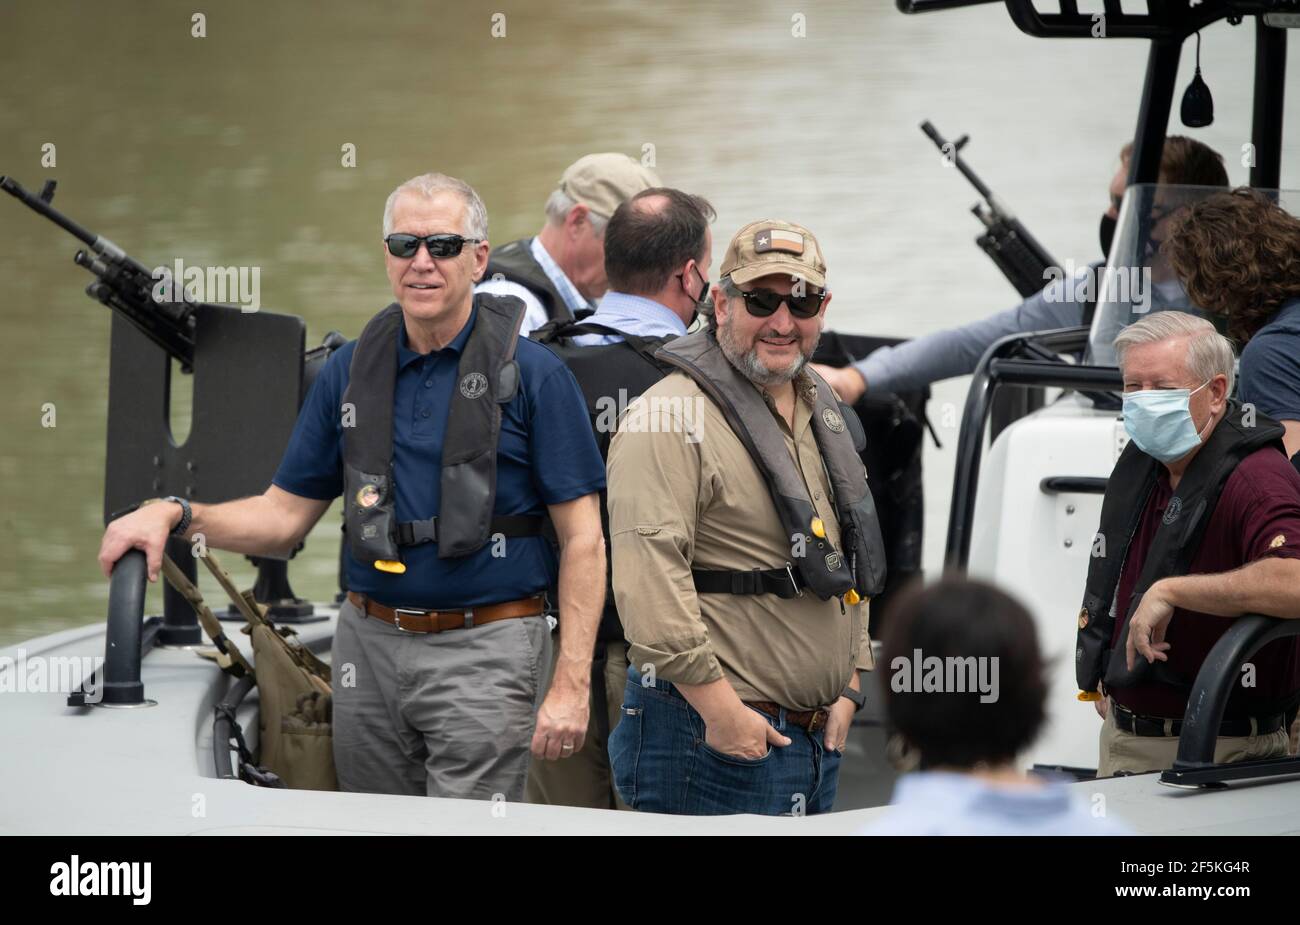 Granjeno, Texas, USA, 26th Mar, 2021. Left to right, Sen. THOM TILLIS of North Carolina, Sen. TED CRUZ of Texas, and Sen. LINDSEY GRAHAM, of South Carolina, join a delegation of 18 Republican U.S. Senators on a tour of the Rio Grande River south of Mission in four Texas Dept. of Public Safety gunboats. The ride marked the end of a whirlwind tour of south Texas during which the senators saw an overcrowded migrant processing center in Donna and a corpse floating in the river north of Anzalduas Park. Credit: Bob Daemmrich/Alamy Live News Stock Photo